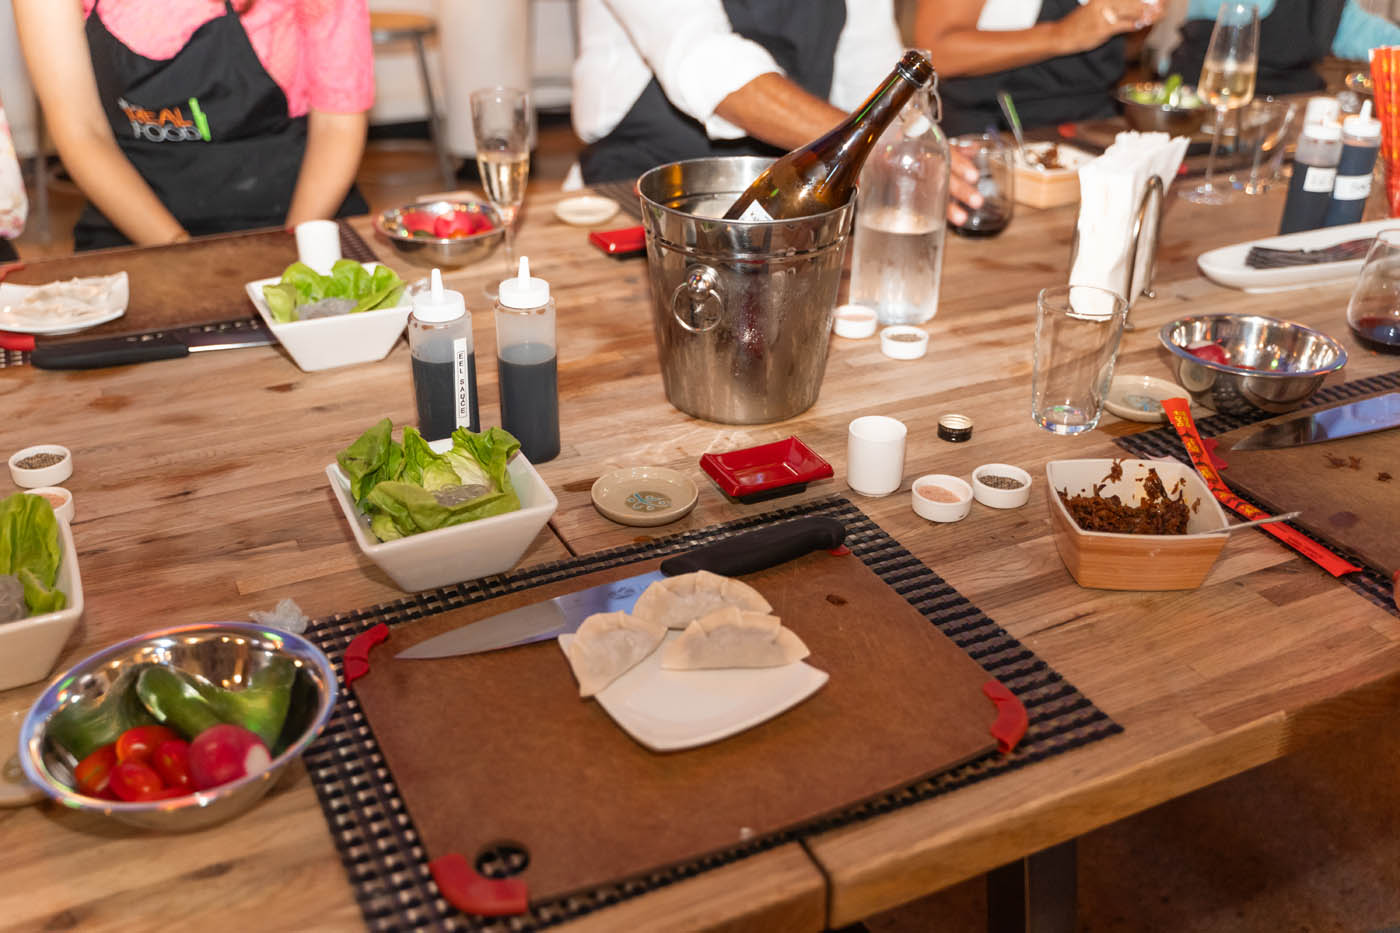 A table with ingredients and food at The Real Food Academy.